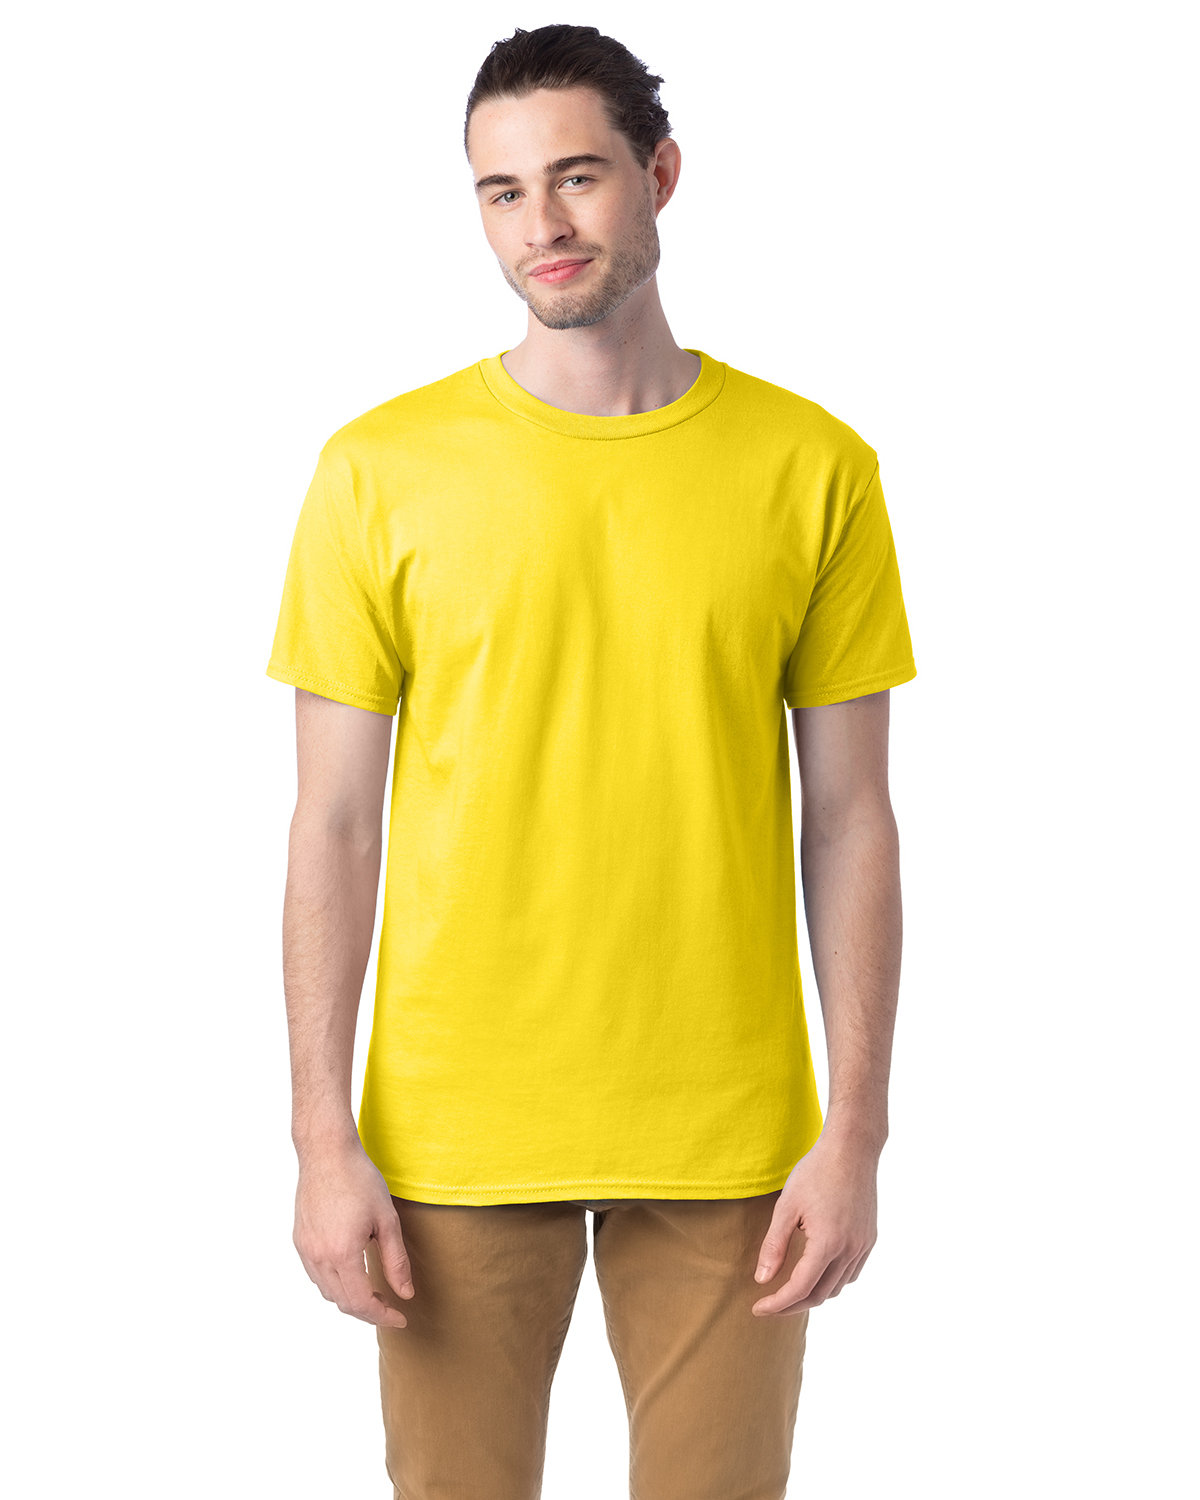 Hanes Adult Essential-T T-Shirt ATHLETIC YELLOW 